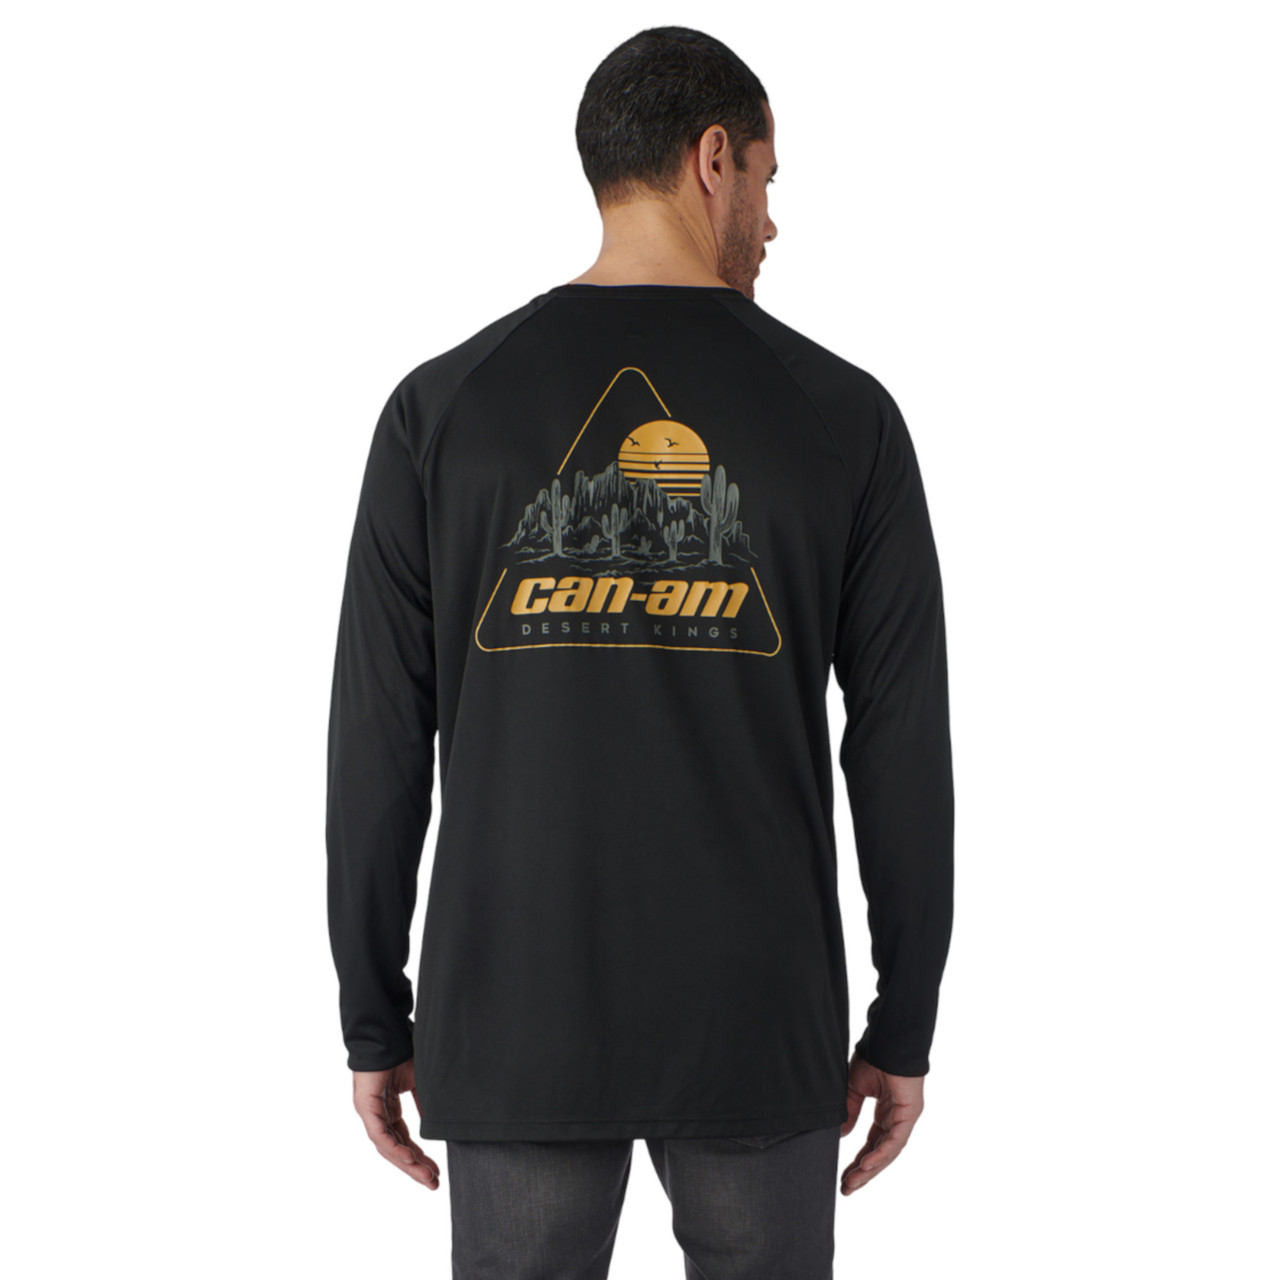 Can-Am New OEM, Men's Extra Large Branded Cotton Performance LS Tee, 4547641290